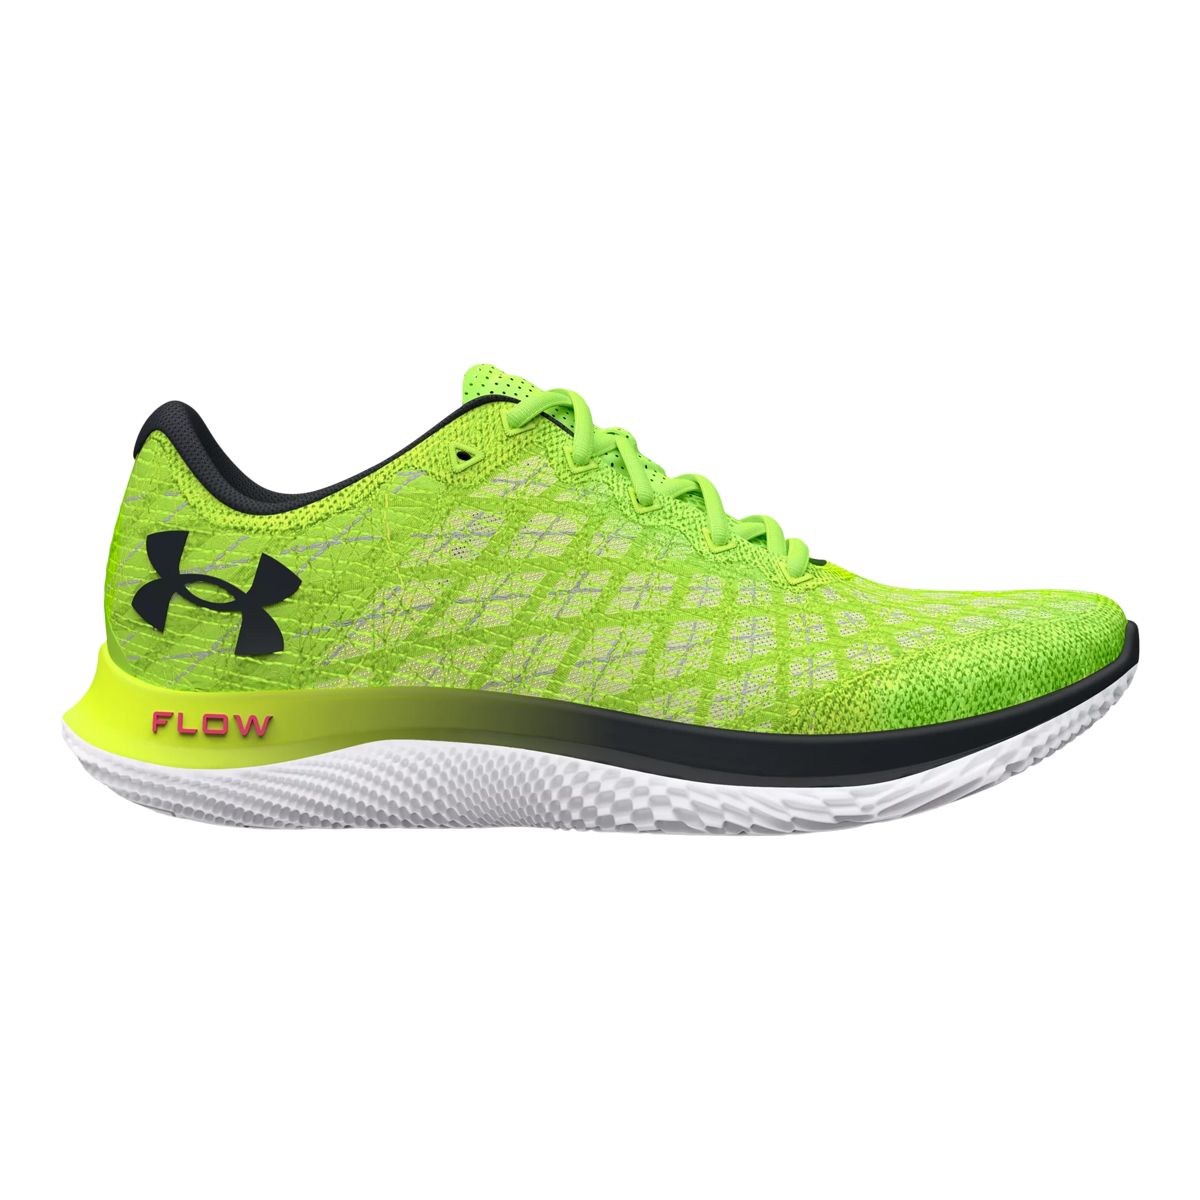 Under Armour Men's Flow Velociti Wind 2 Breathable Knit Running Shoes ...